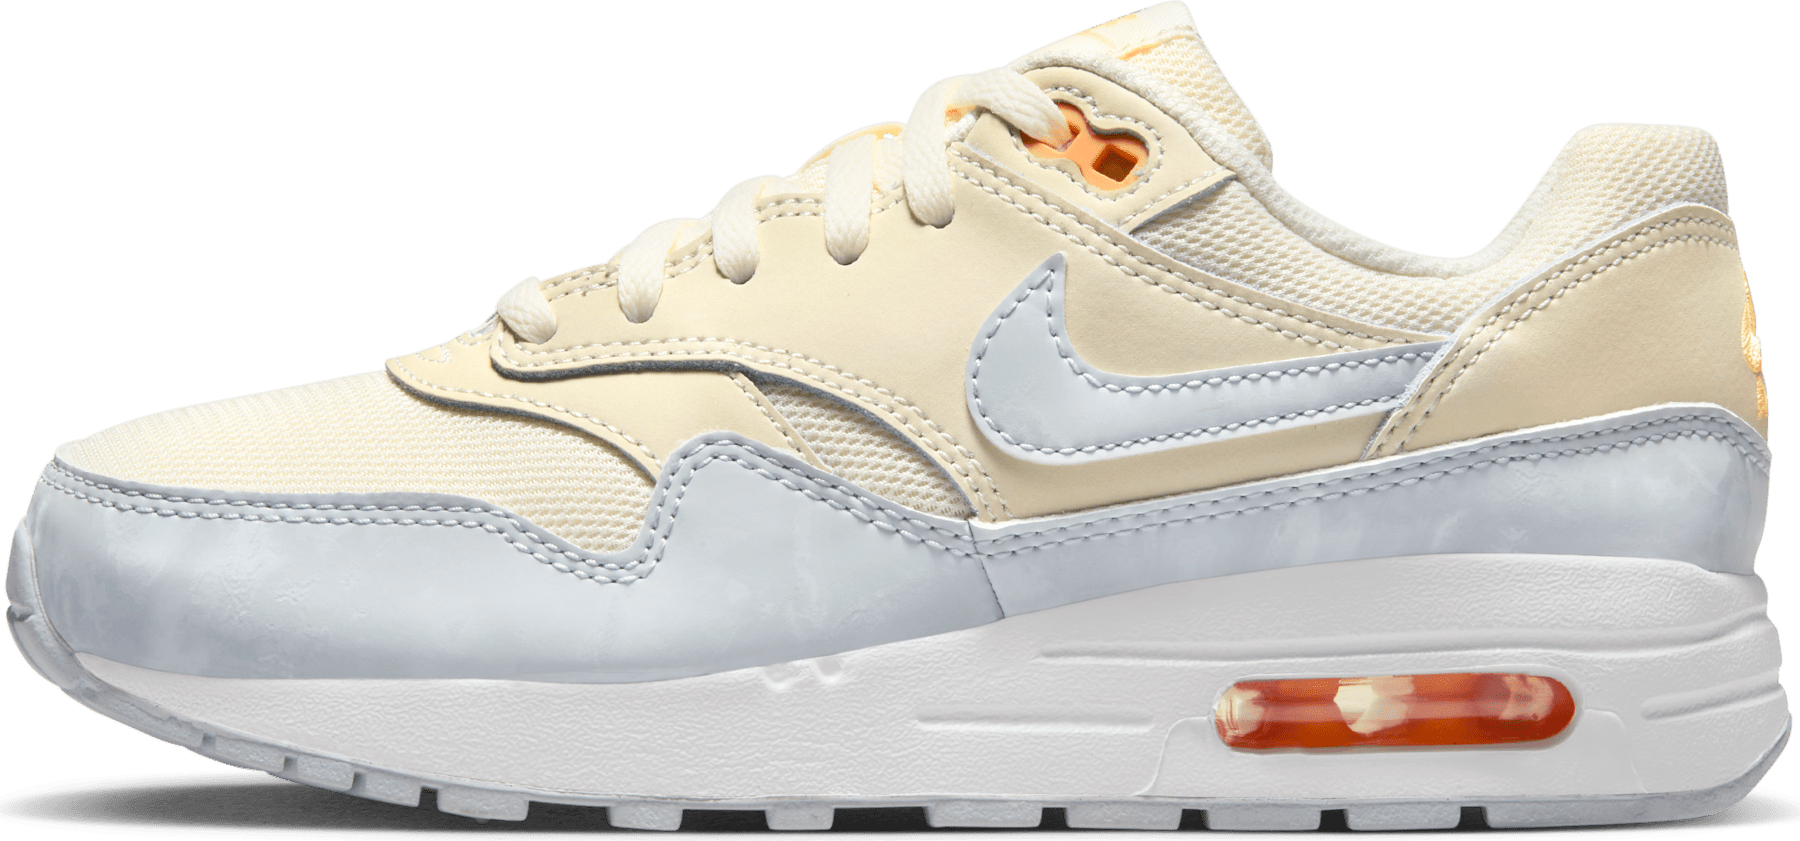 Nike Big Kids' Air Max Casual Shoes Pale Ivory/Melon Tint/White